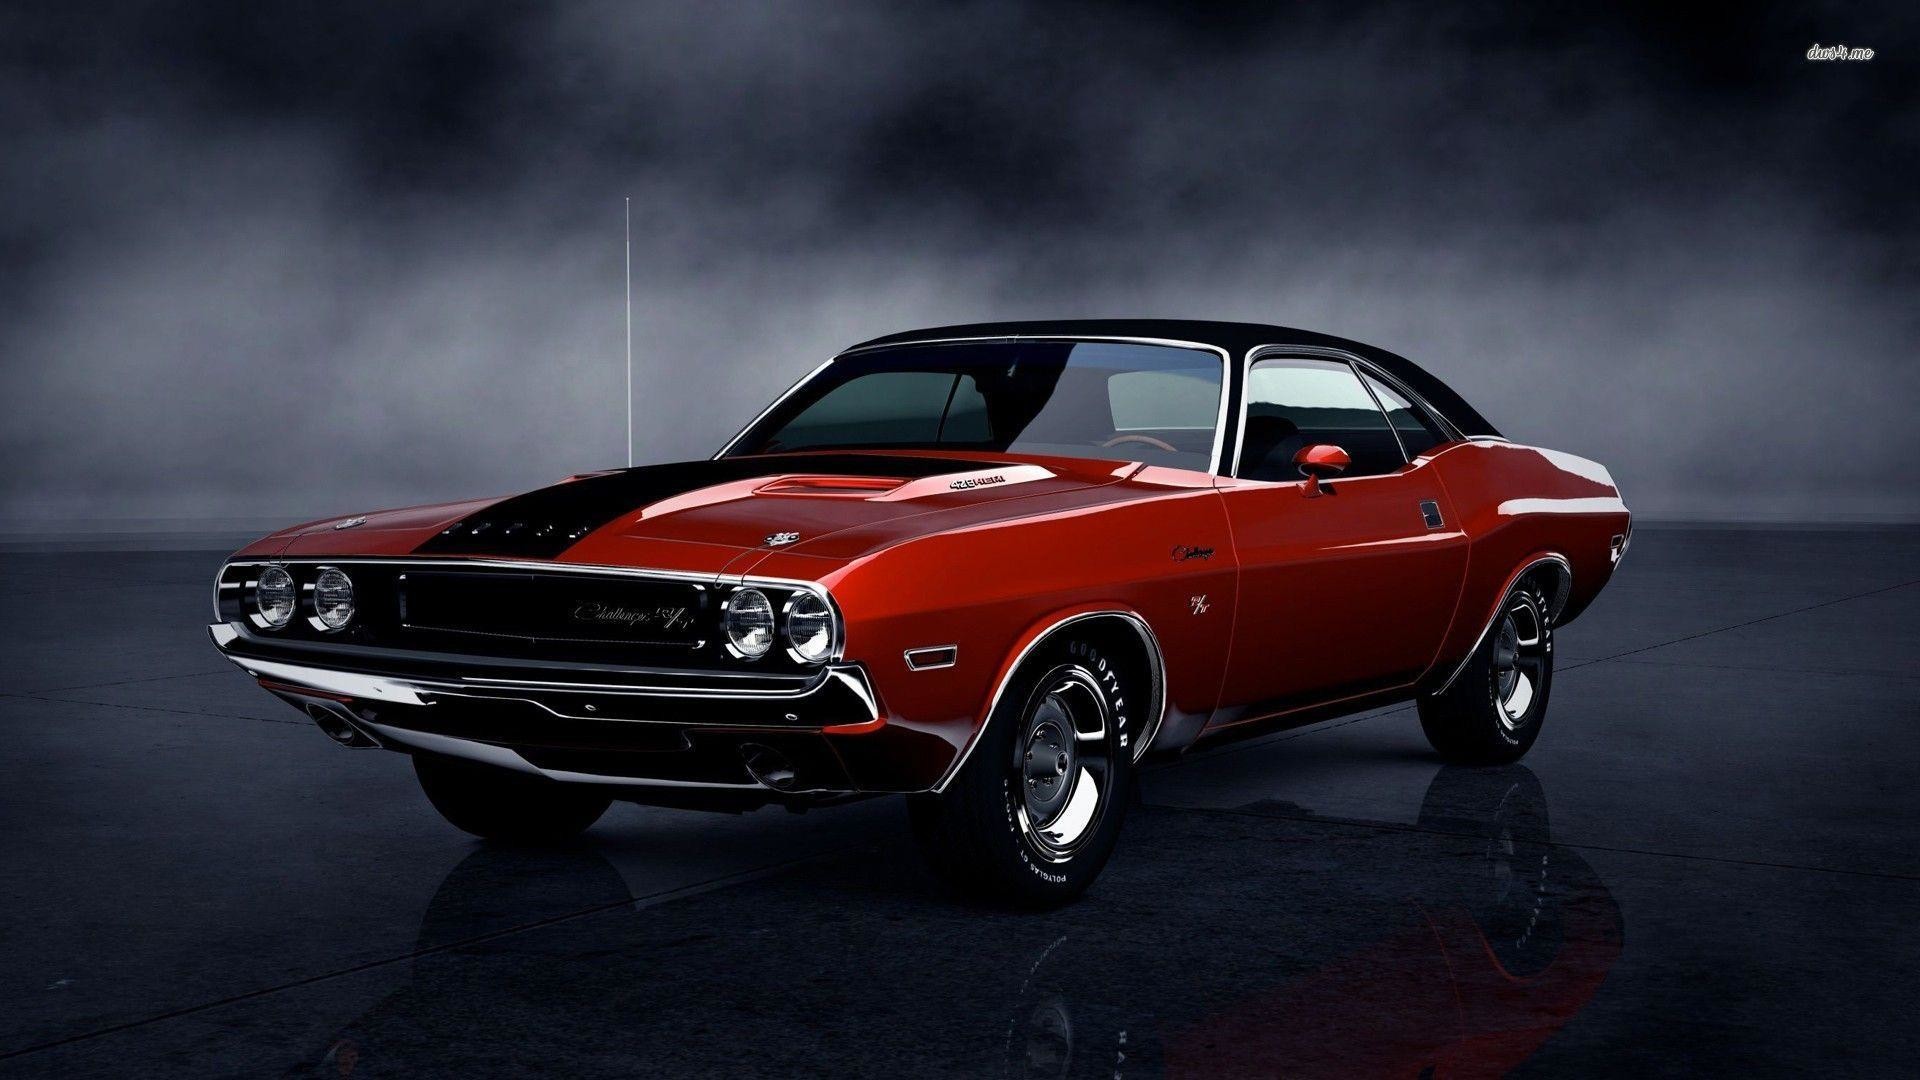 Free download 1970 Dodge Challenger Wallpaper 75 images [1920x1080] for